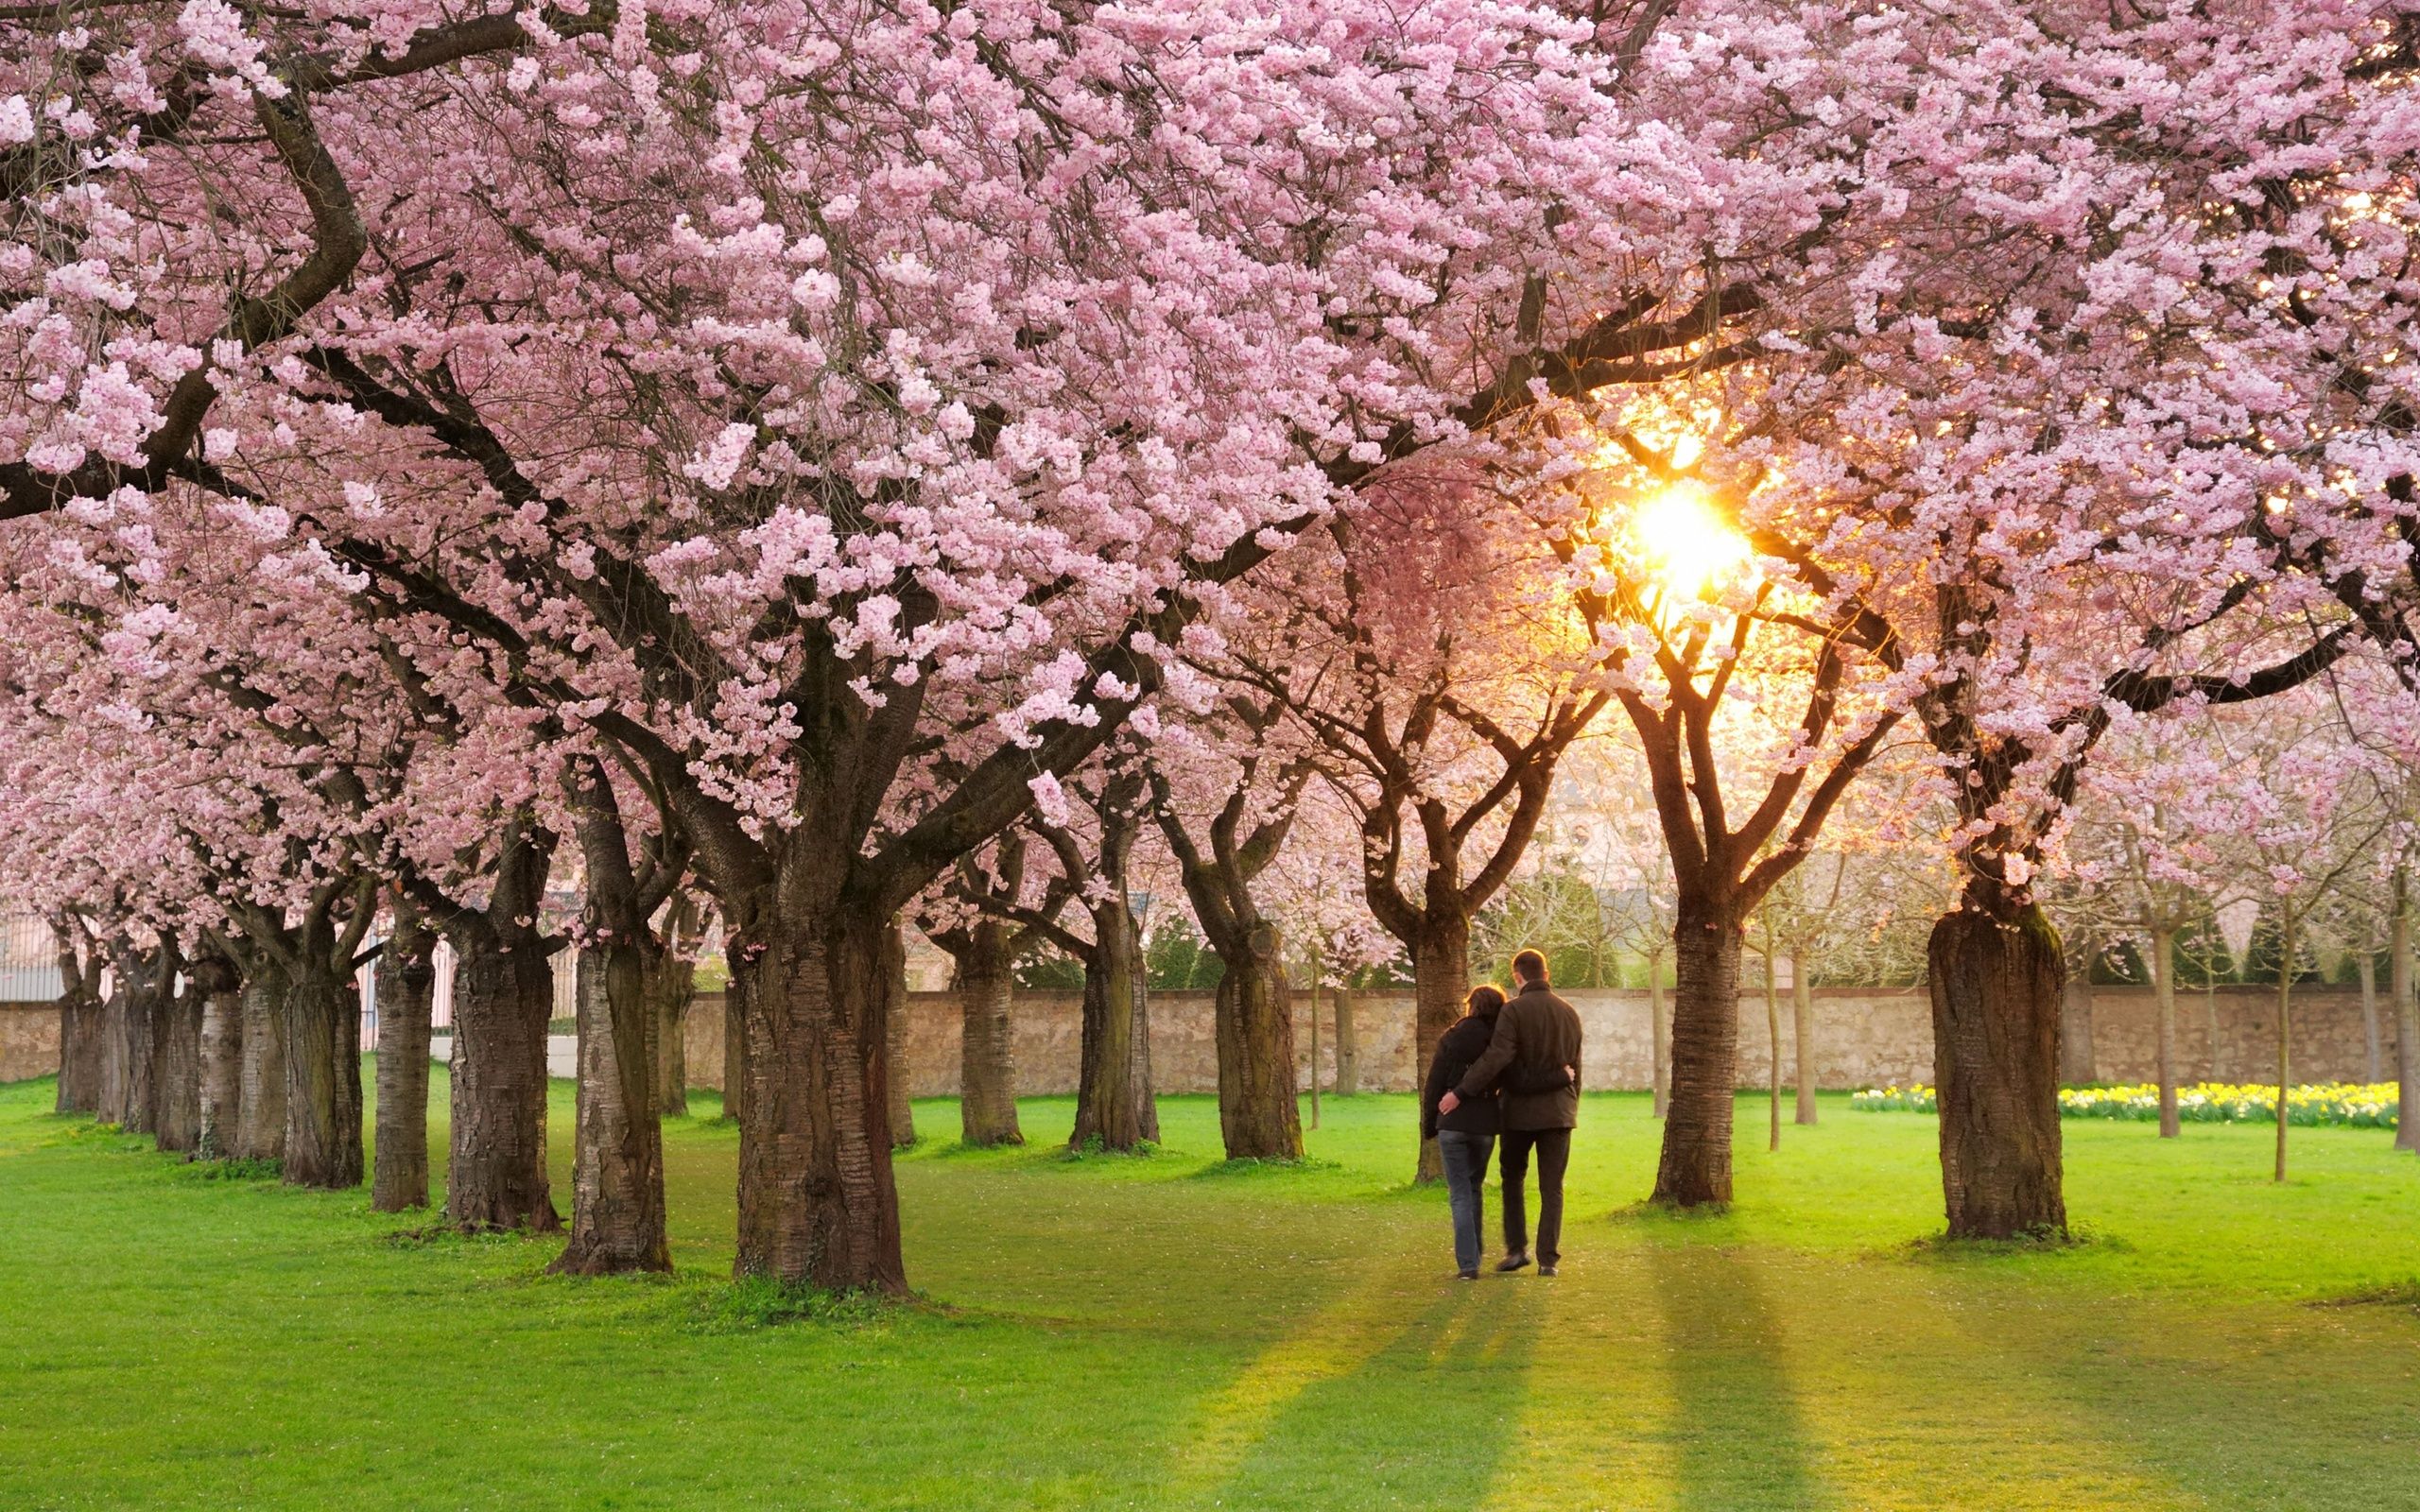 Beautiful Spring images download Wallpapers, Backgrounds, Images